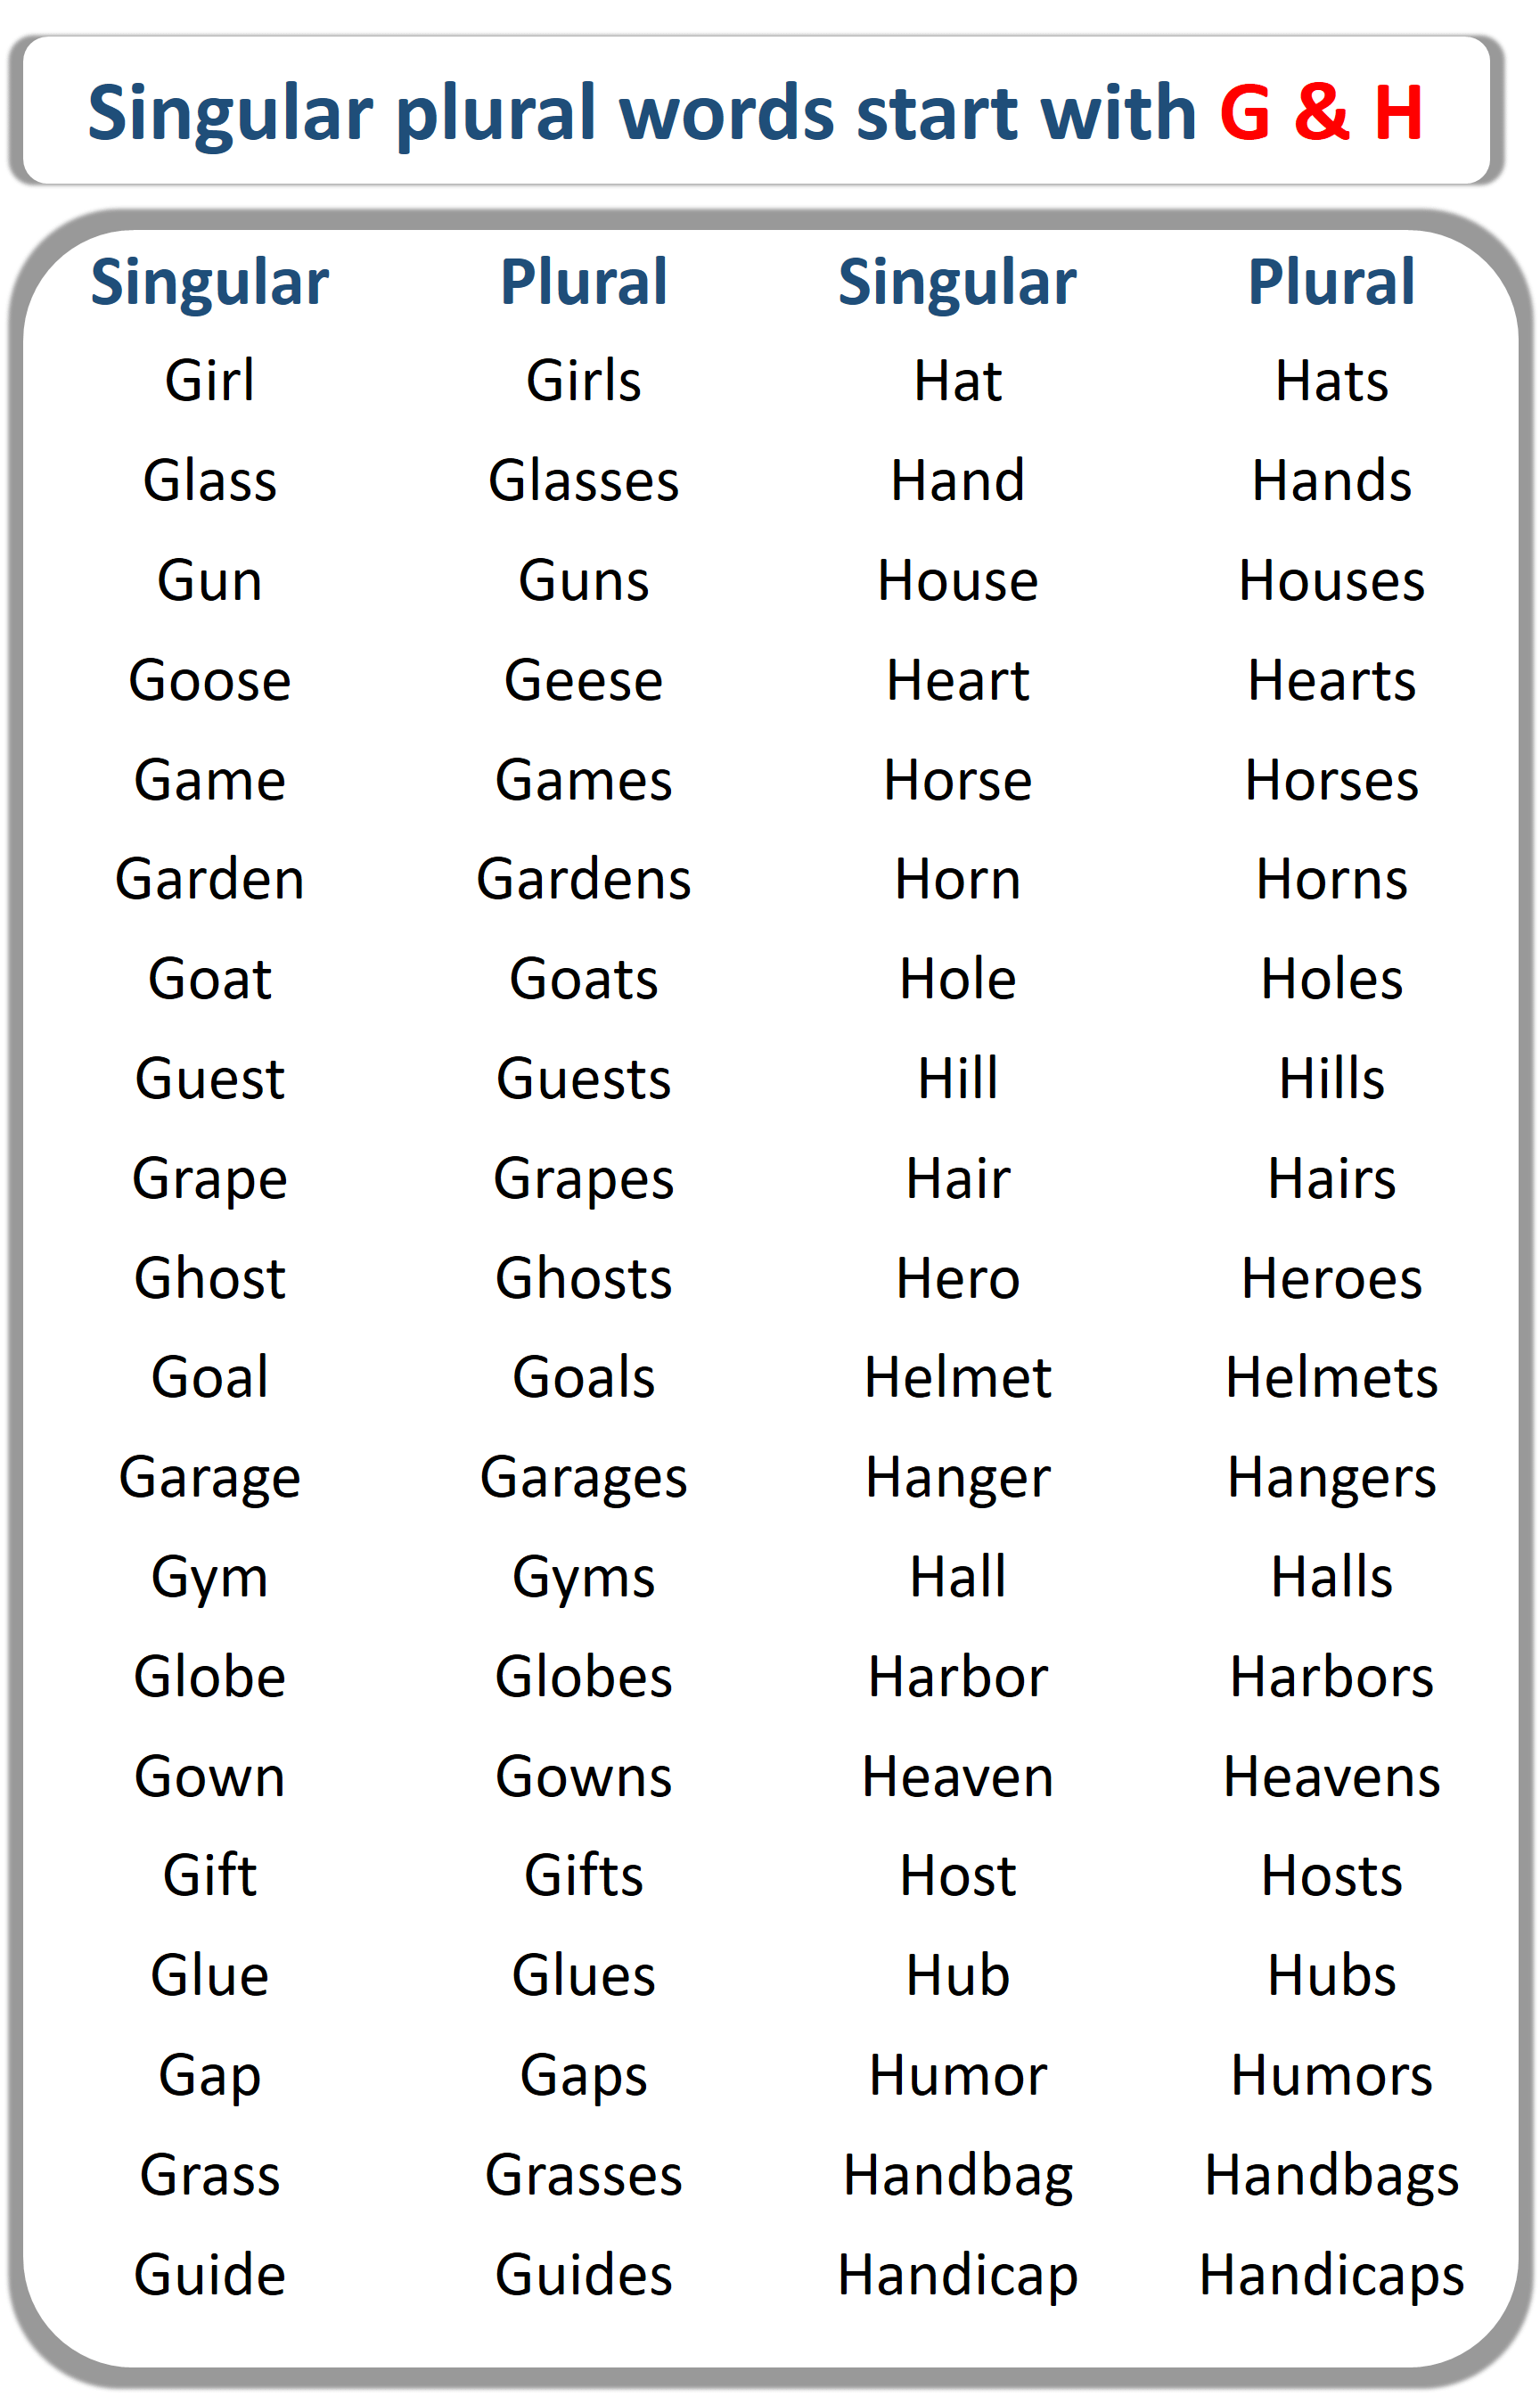 Singular Plural Words List From A to Z | G & H